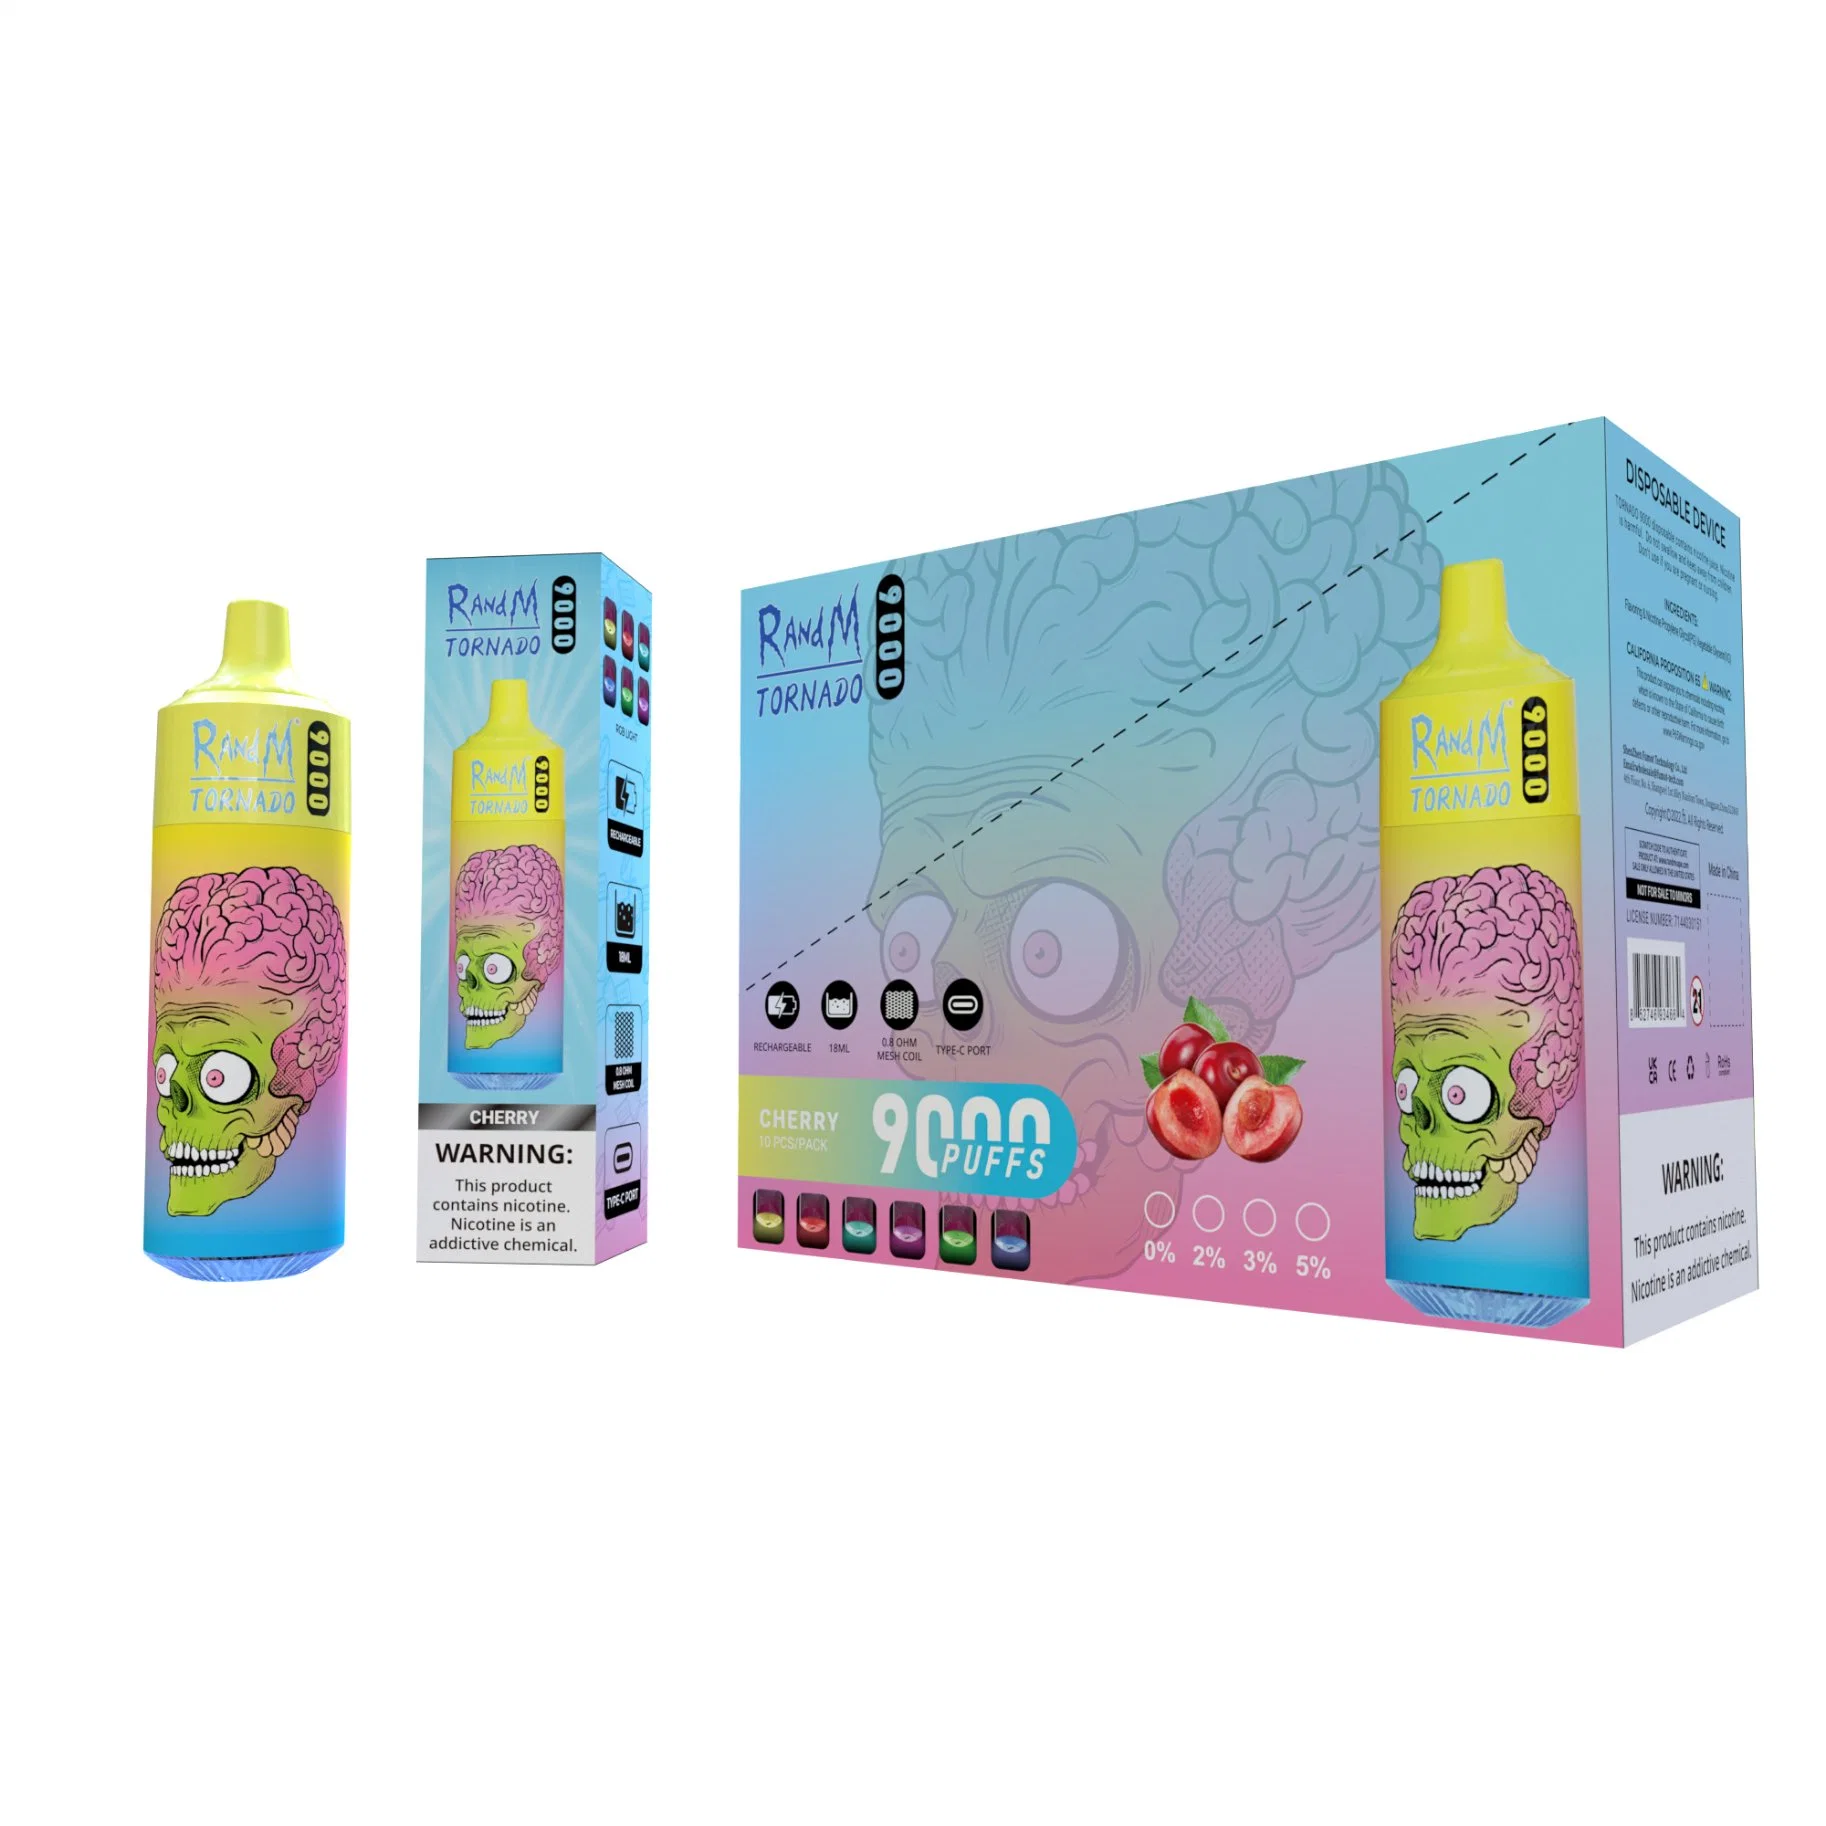 Original Disposable/Chargeable Vapes Randm Tornado 9000 Puffs with 20 Flavours in Stock